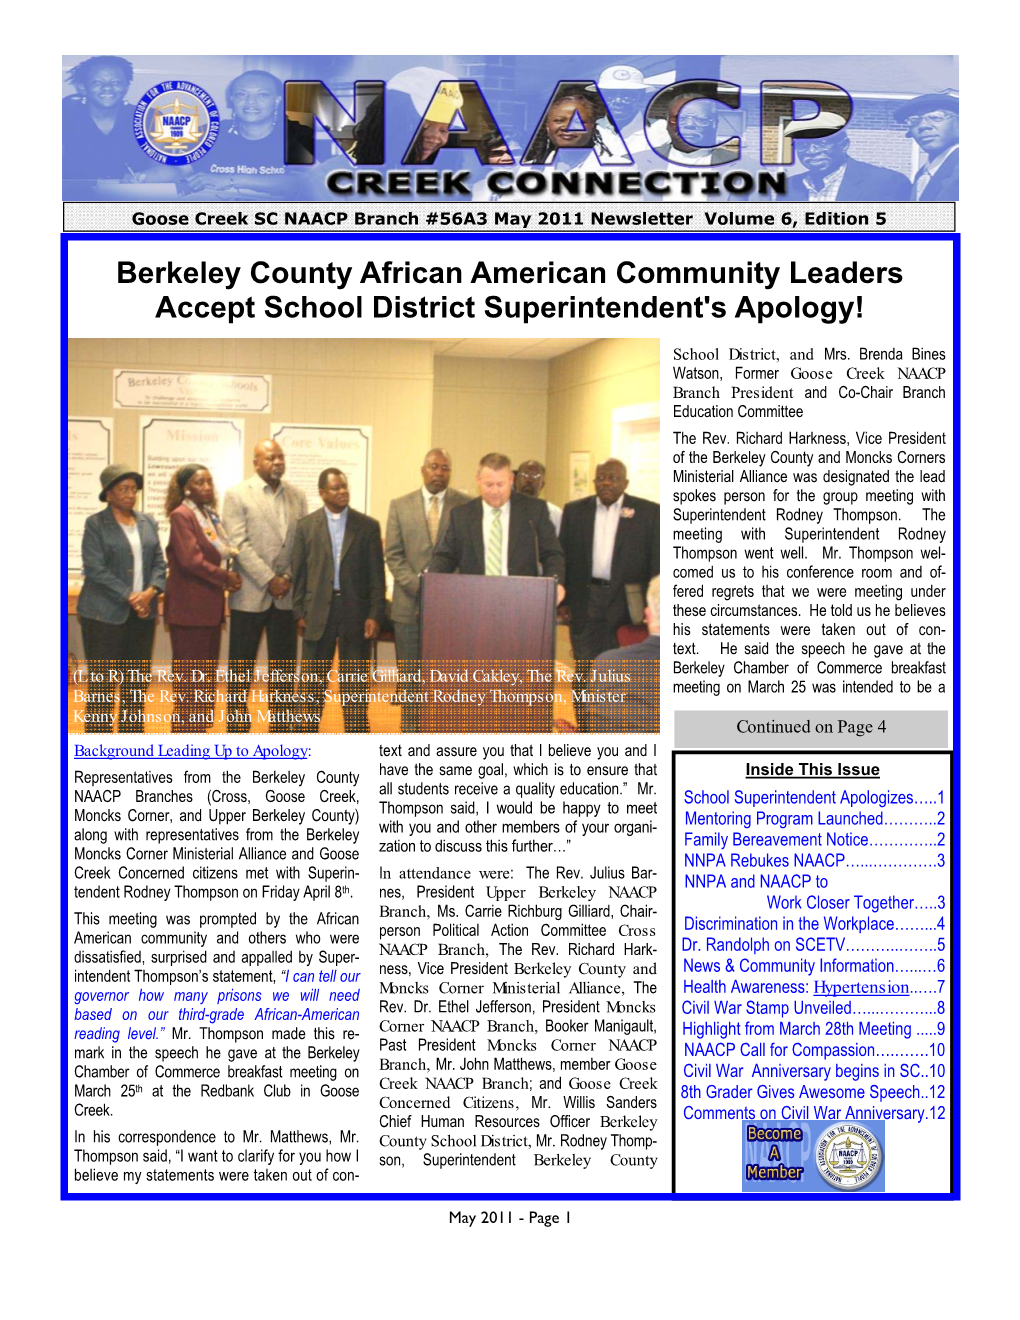 Berkeley County African American Community Leaders Accept School District Superintendent's Apology!